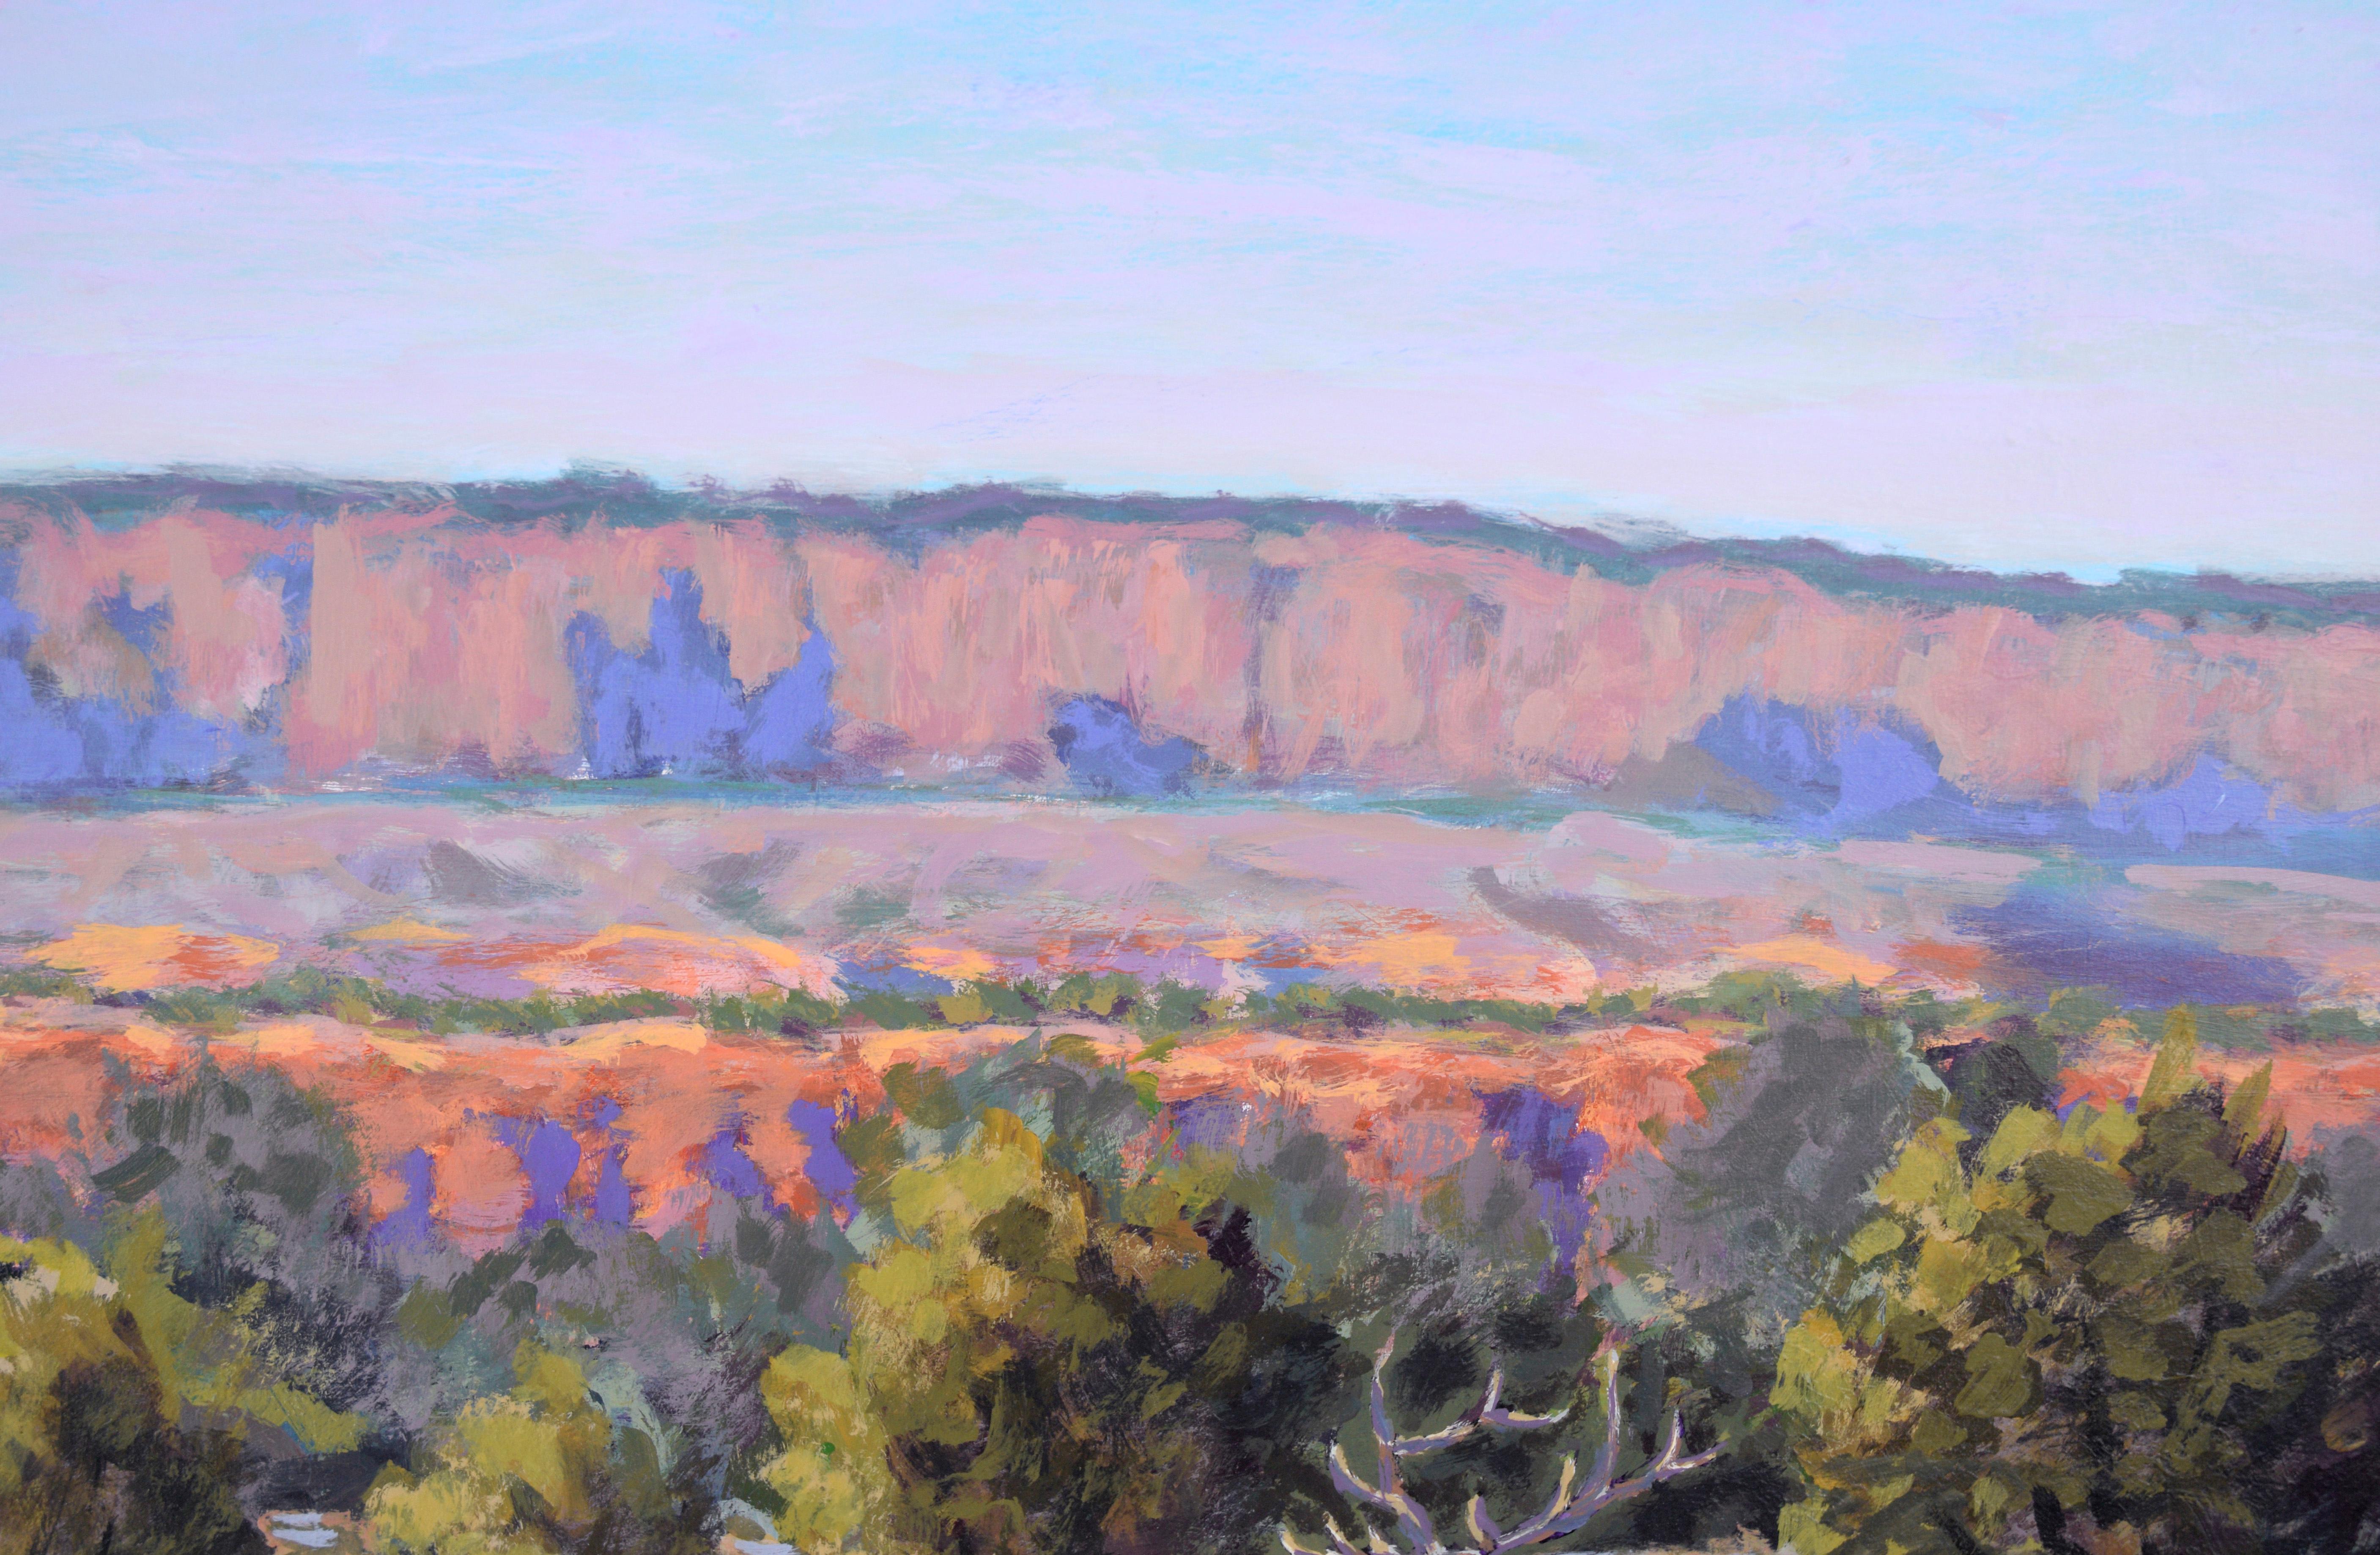 Red Cliffs in the Desert - Western Plein Aire Landscape in Acrylic on Board

Vibrant desert landscape by California Plein Aire artist Nick White (American, 1943-2009). In the foreground, there is a line of dense shrubs. Off to the right, there is an